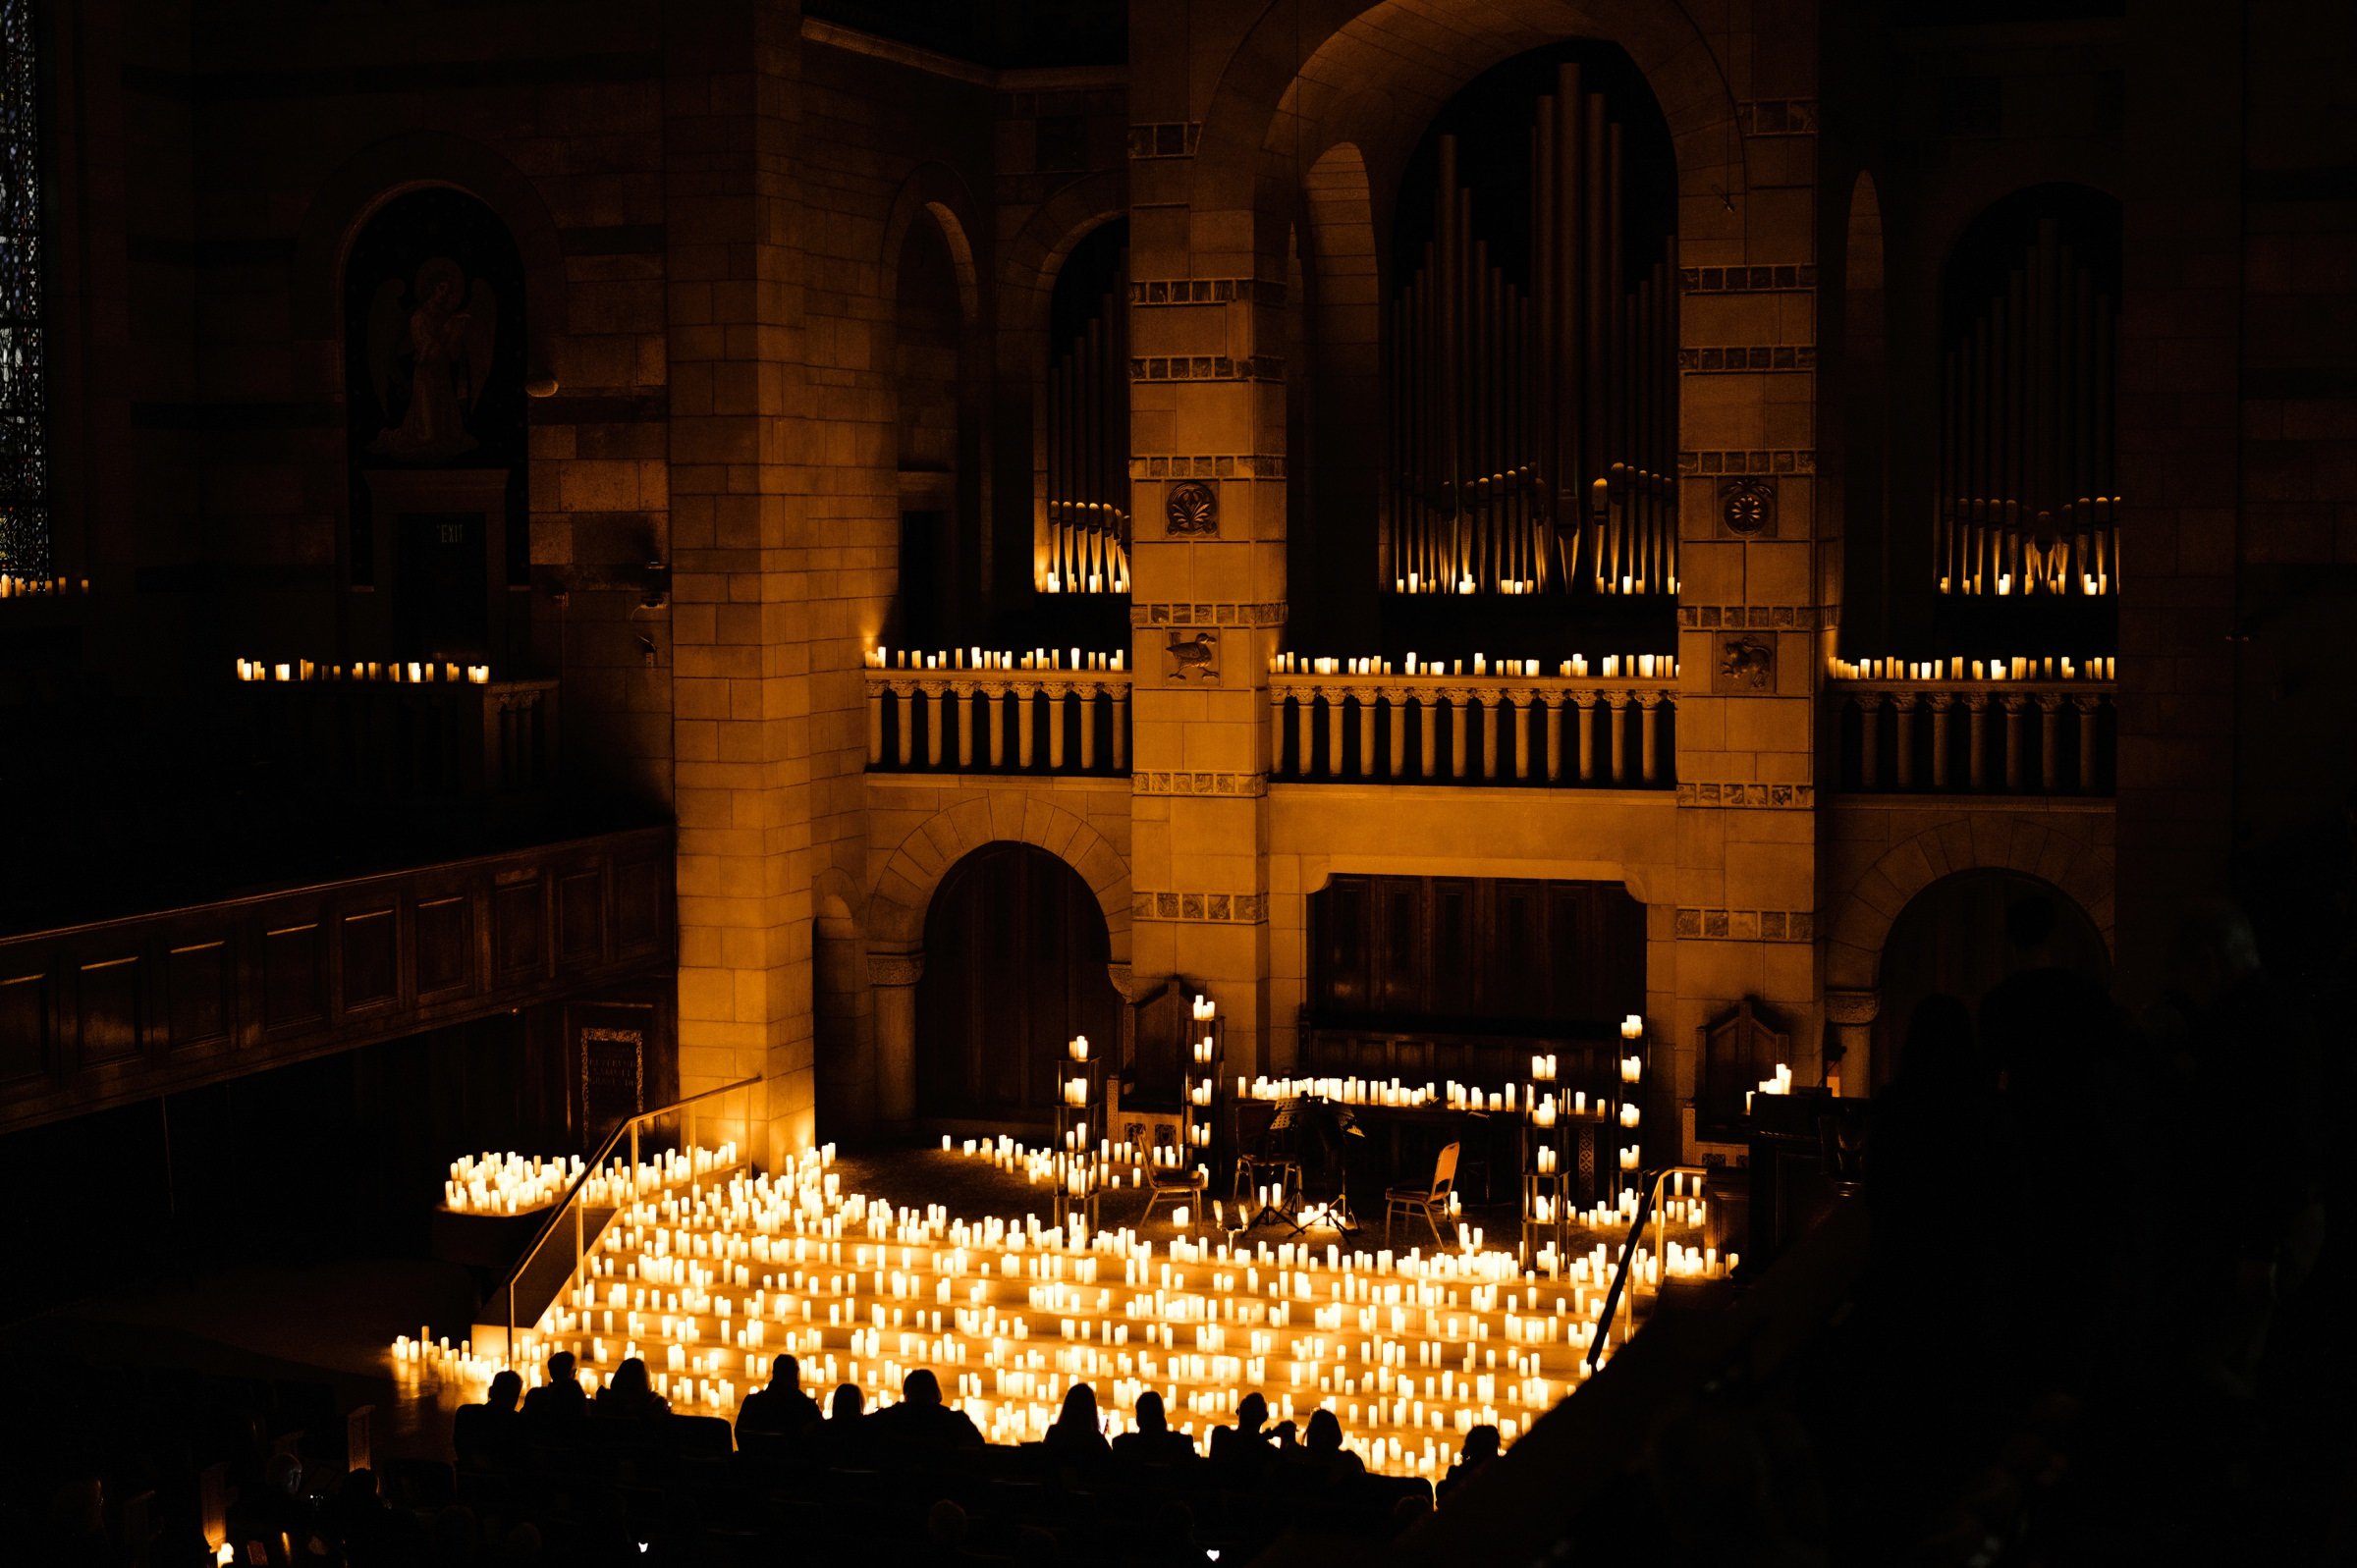 Grand Rapids Fountain Street Church Candlelight Concert Performance - Photographed for Fever by Ryan Inman - 17.jpg